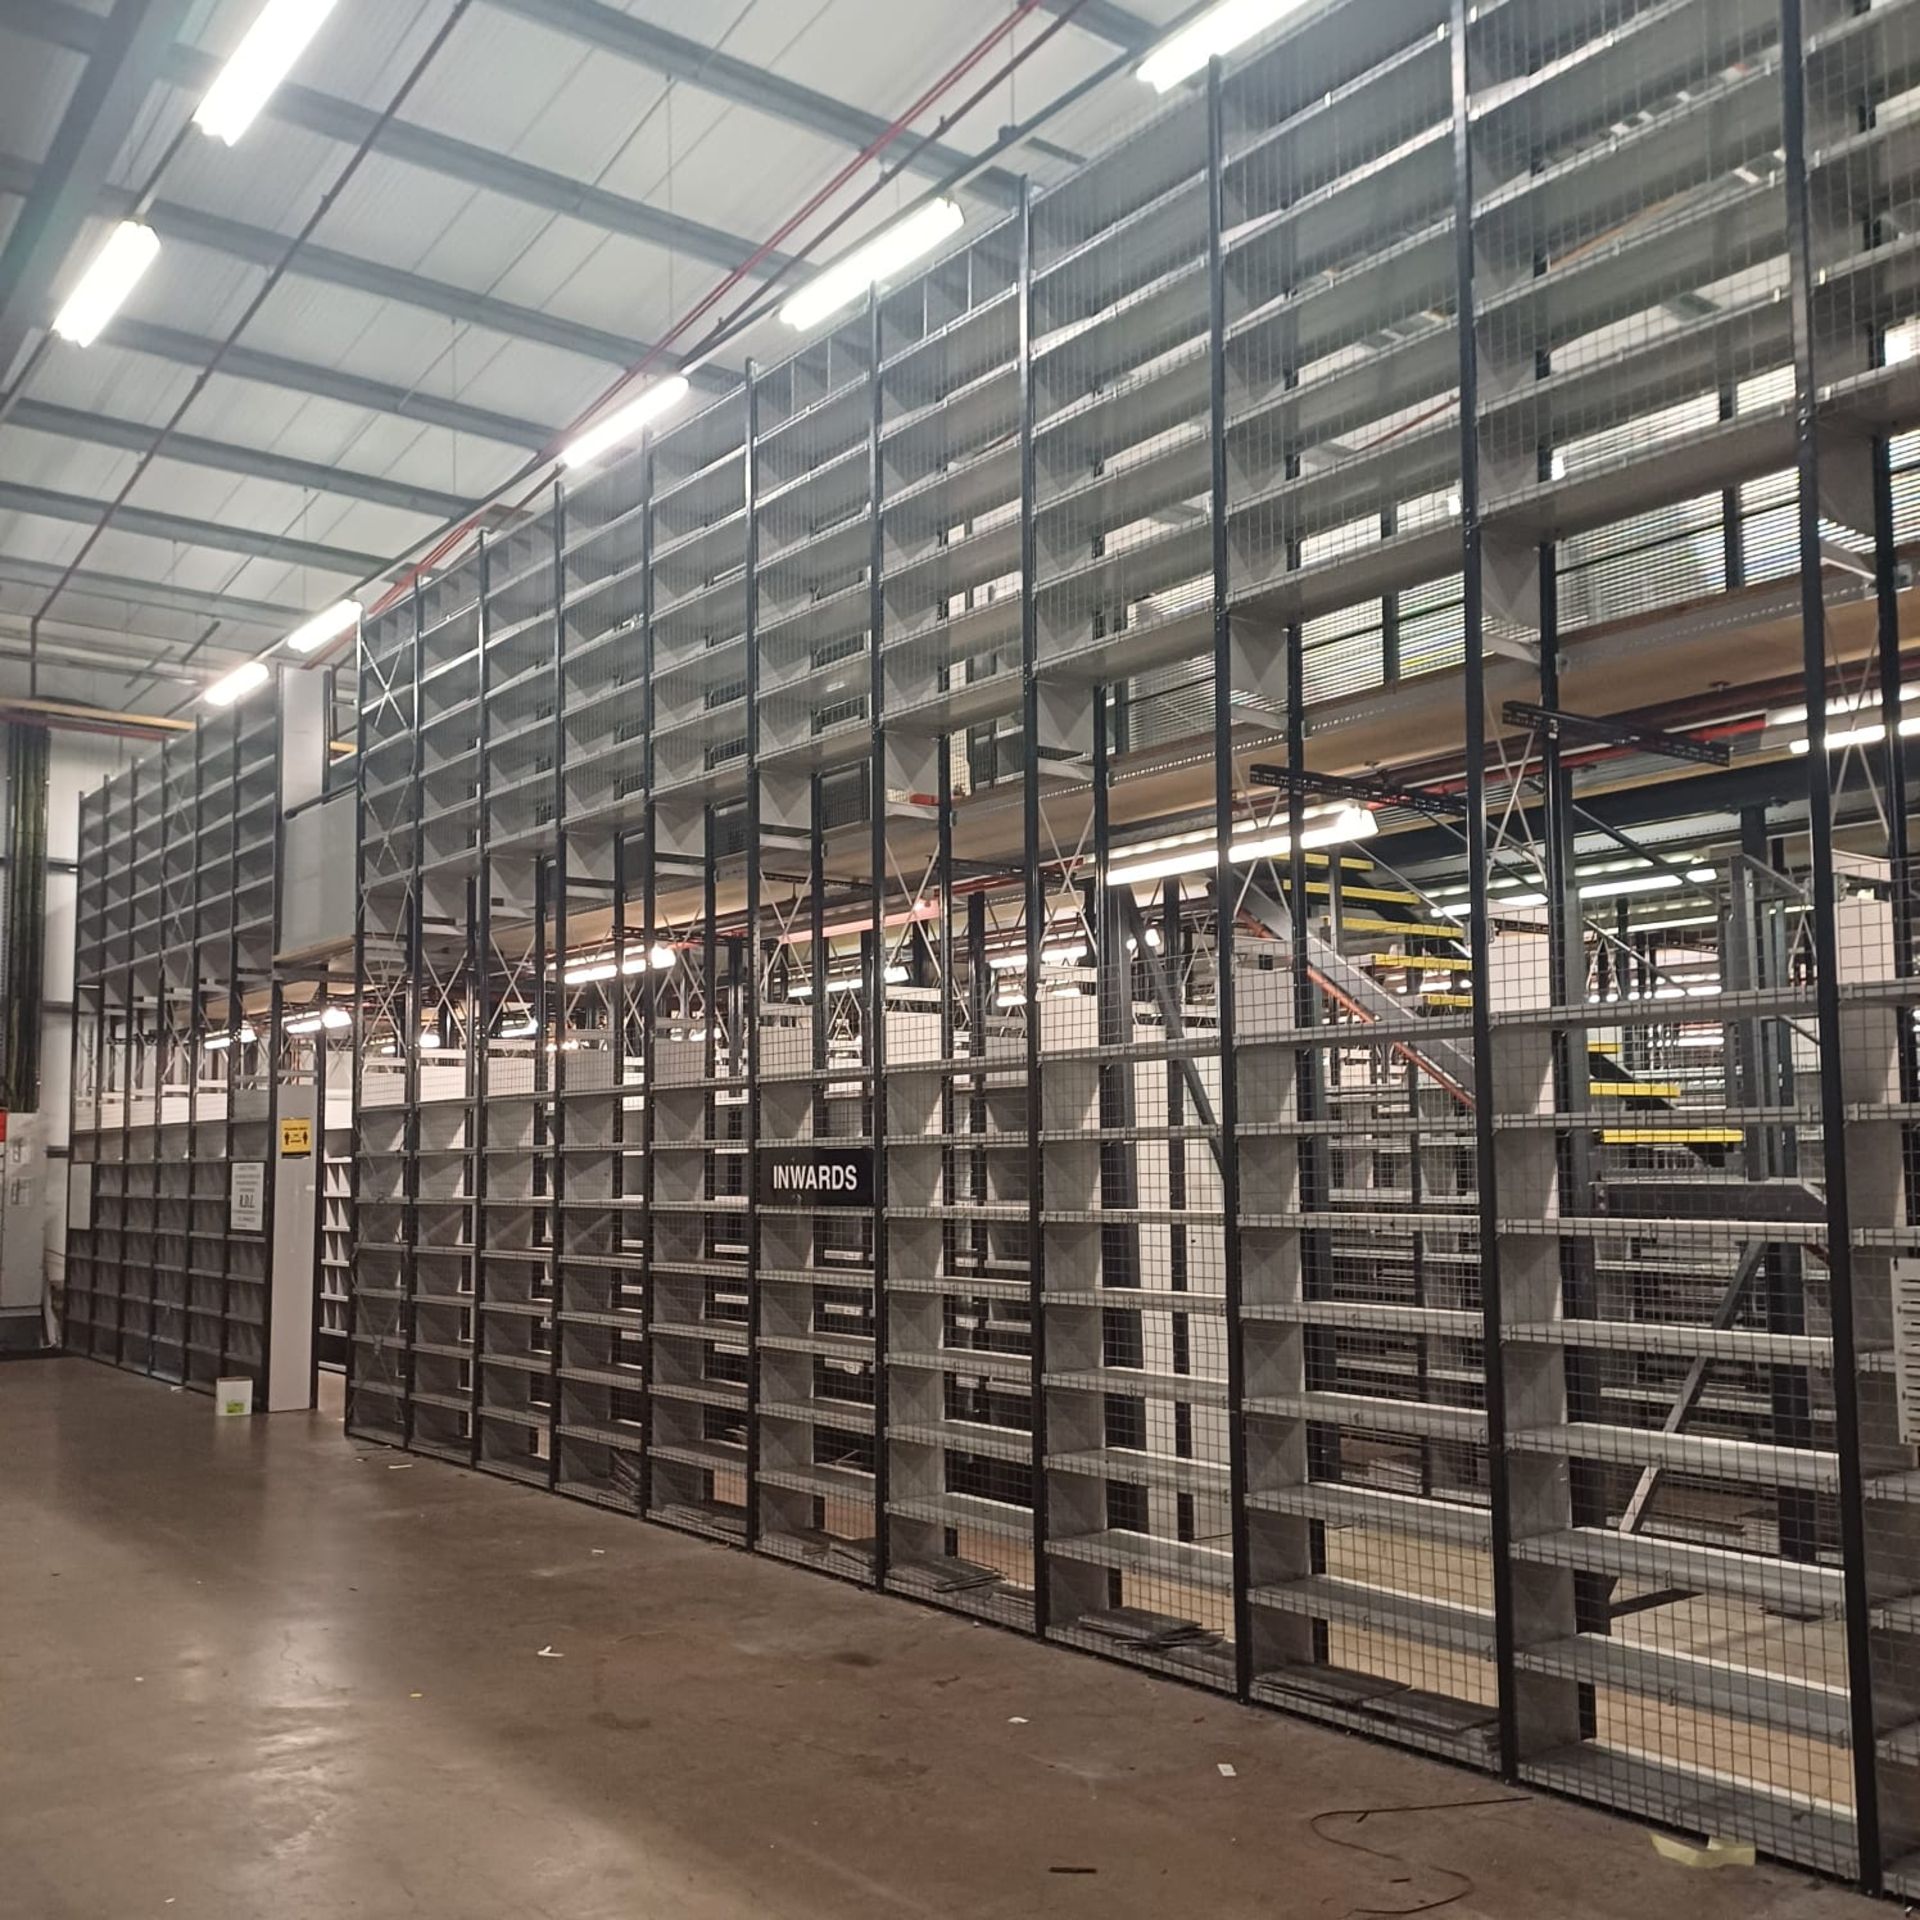 50 Bays - 3.5m height - Link 51 Shelving - 400mm depth x 1m length - Image 2 of 2